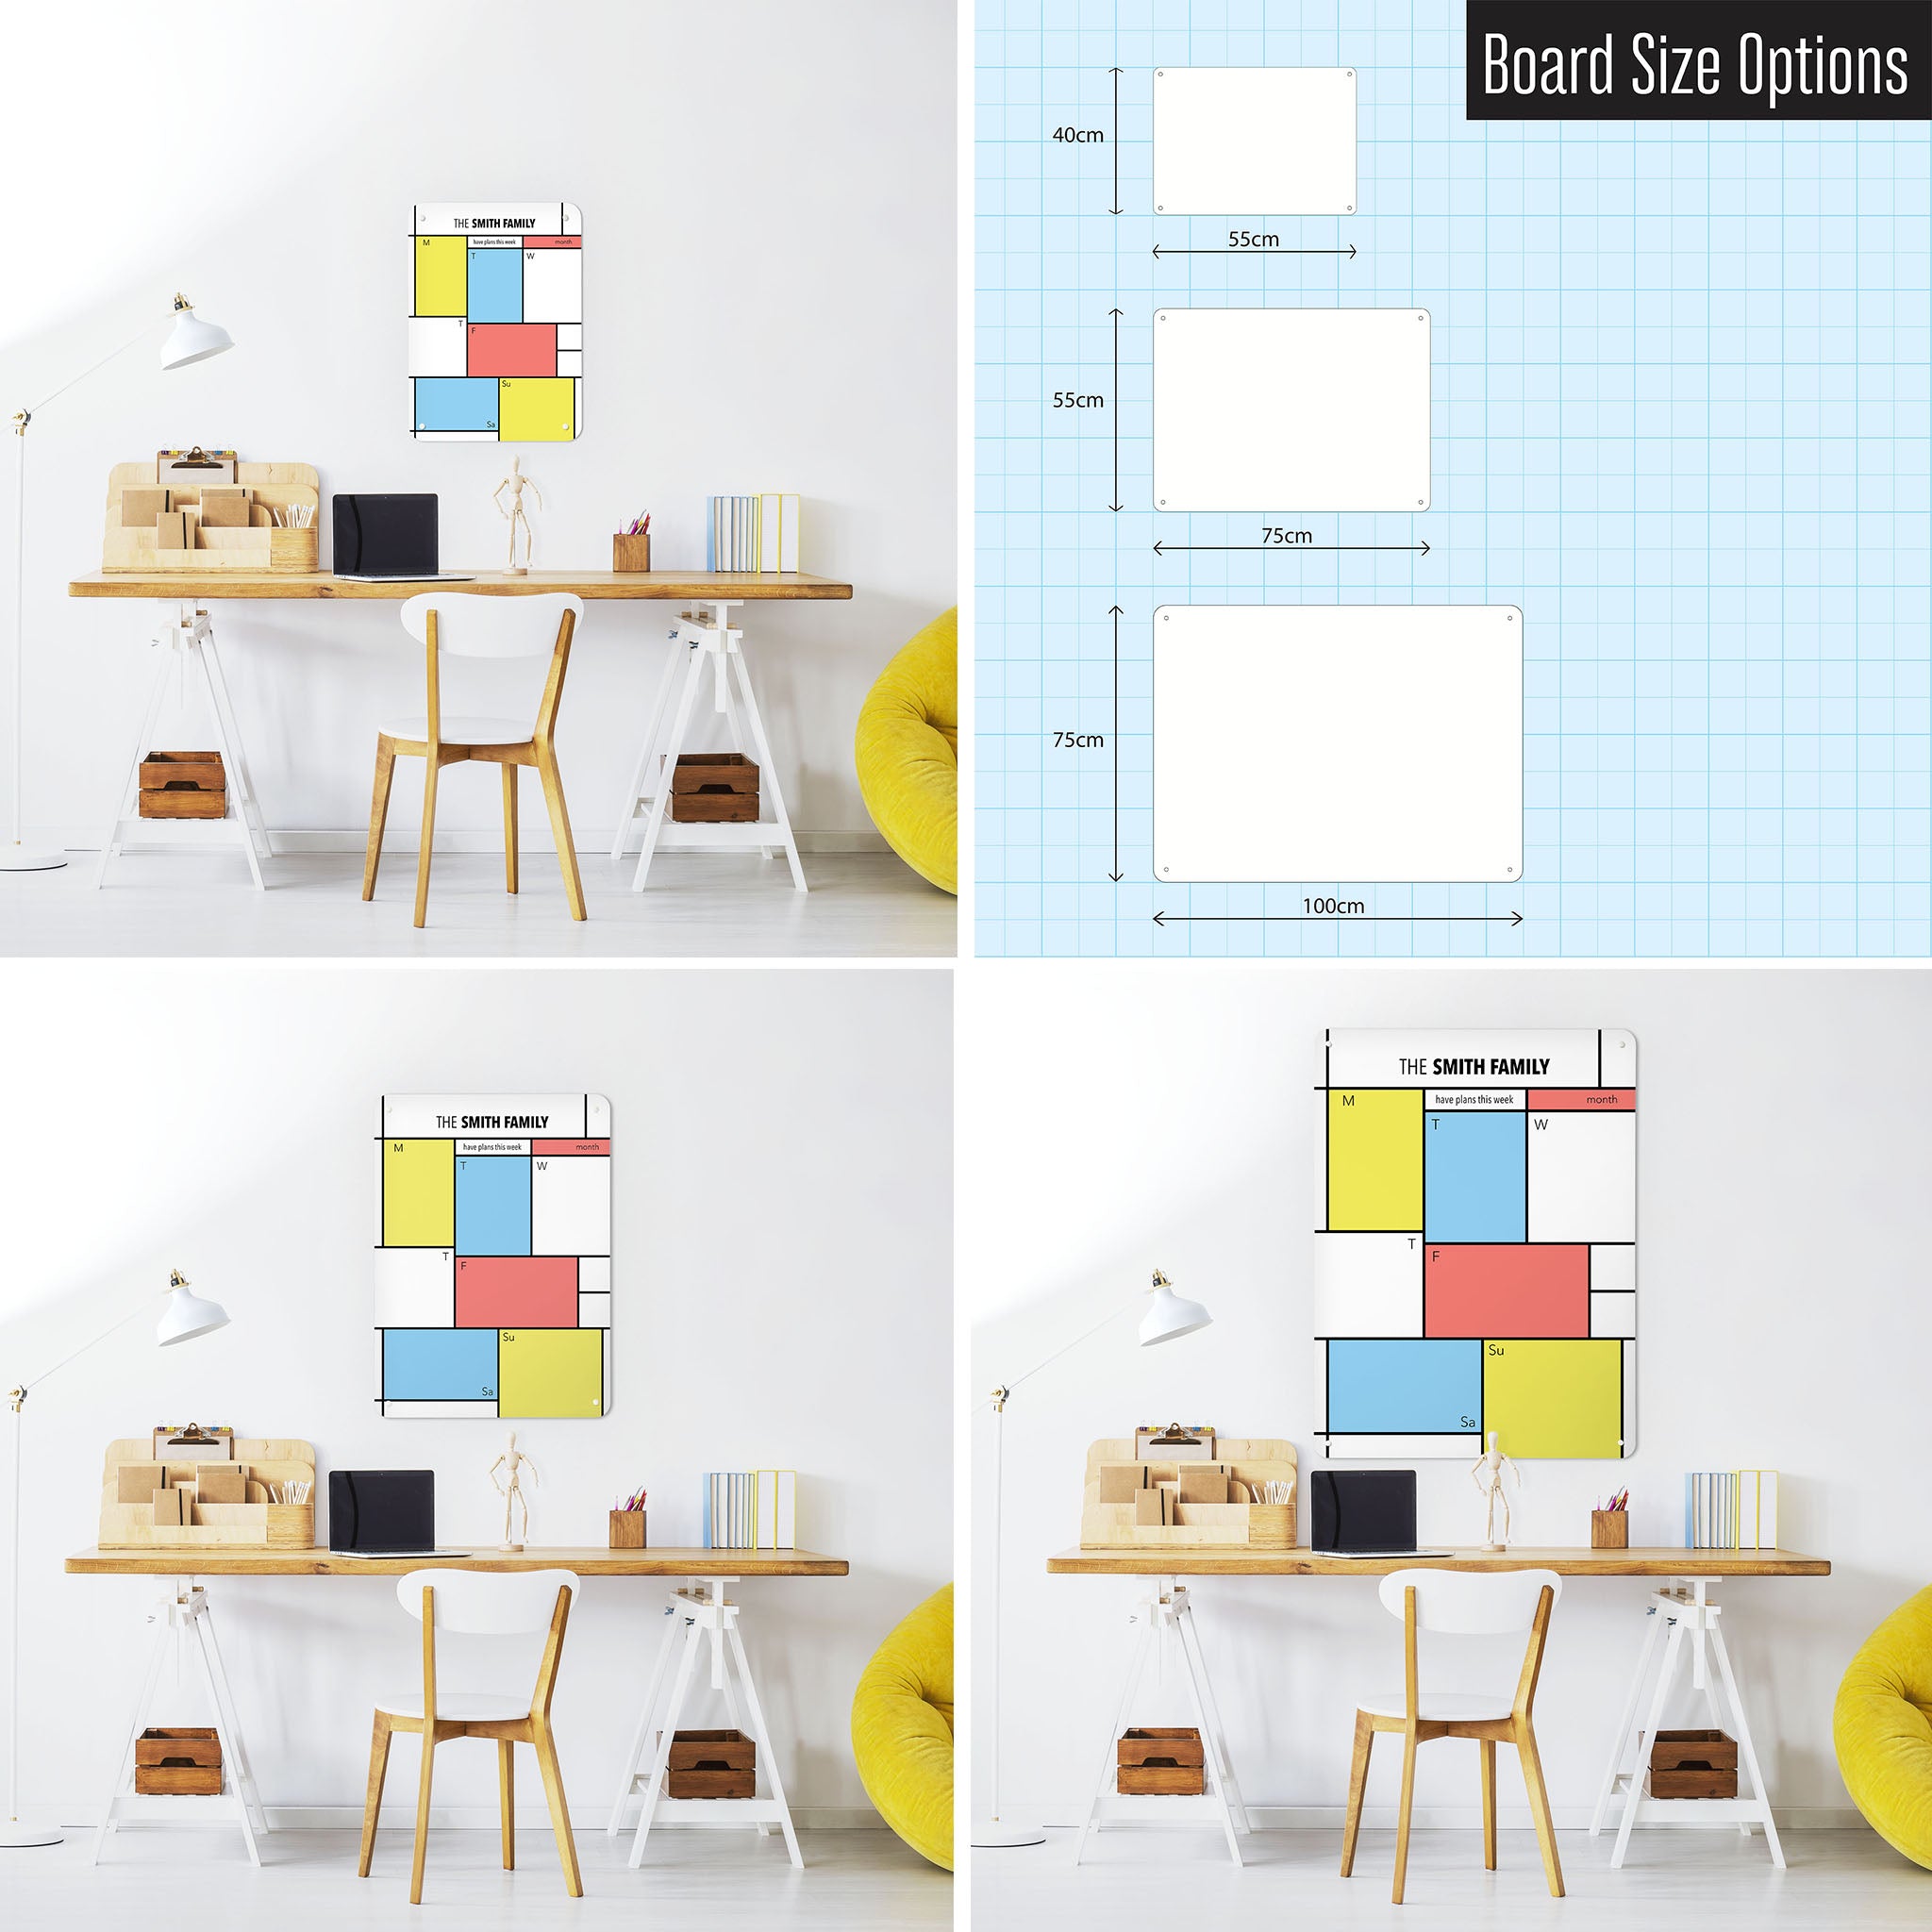 Three photographs of a workspace interior and a diagram to show size comparisons of a Mondrian design weekly planner to personalise portrait magnetic notice board